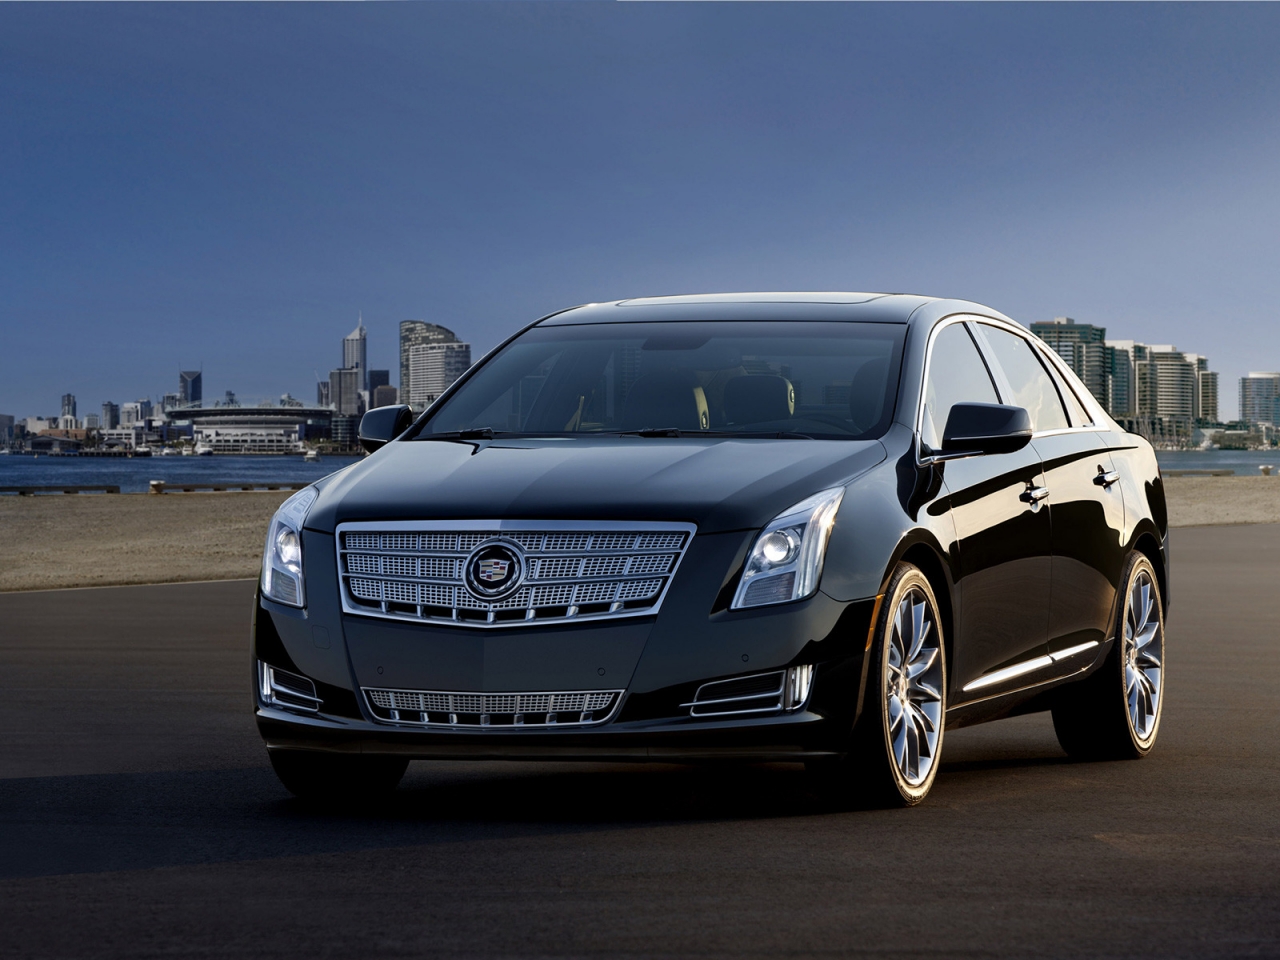 Cadillac XTS 2013 Edition for 1280 x 960 resolution